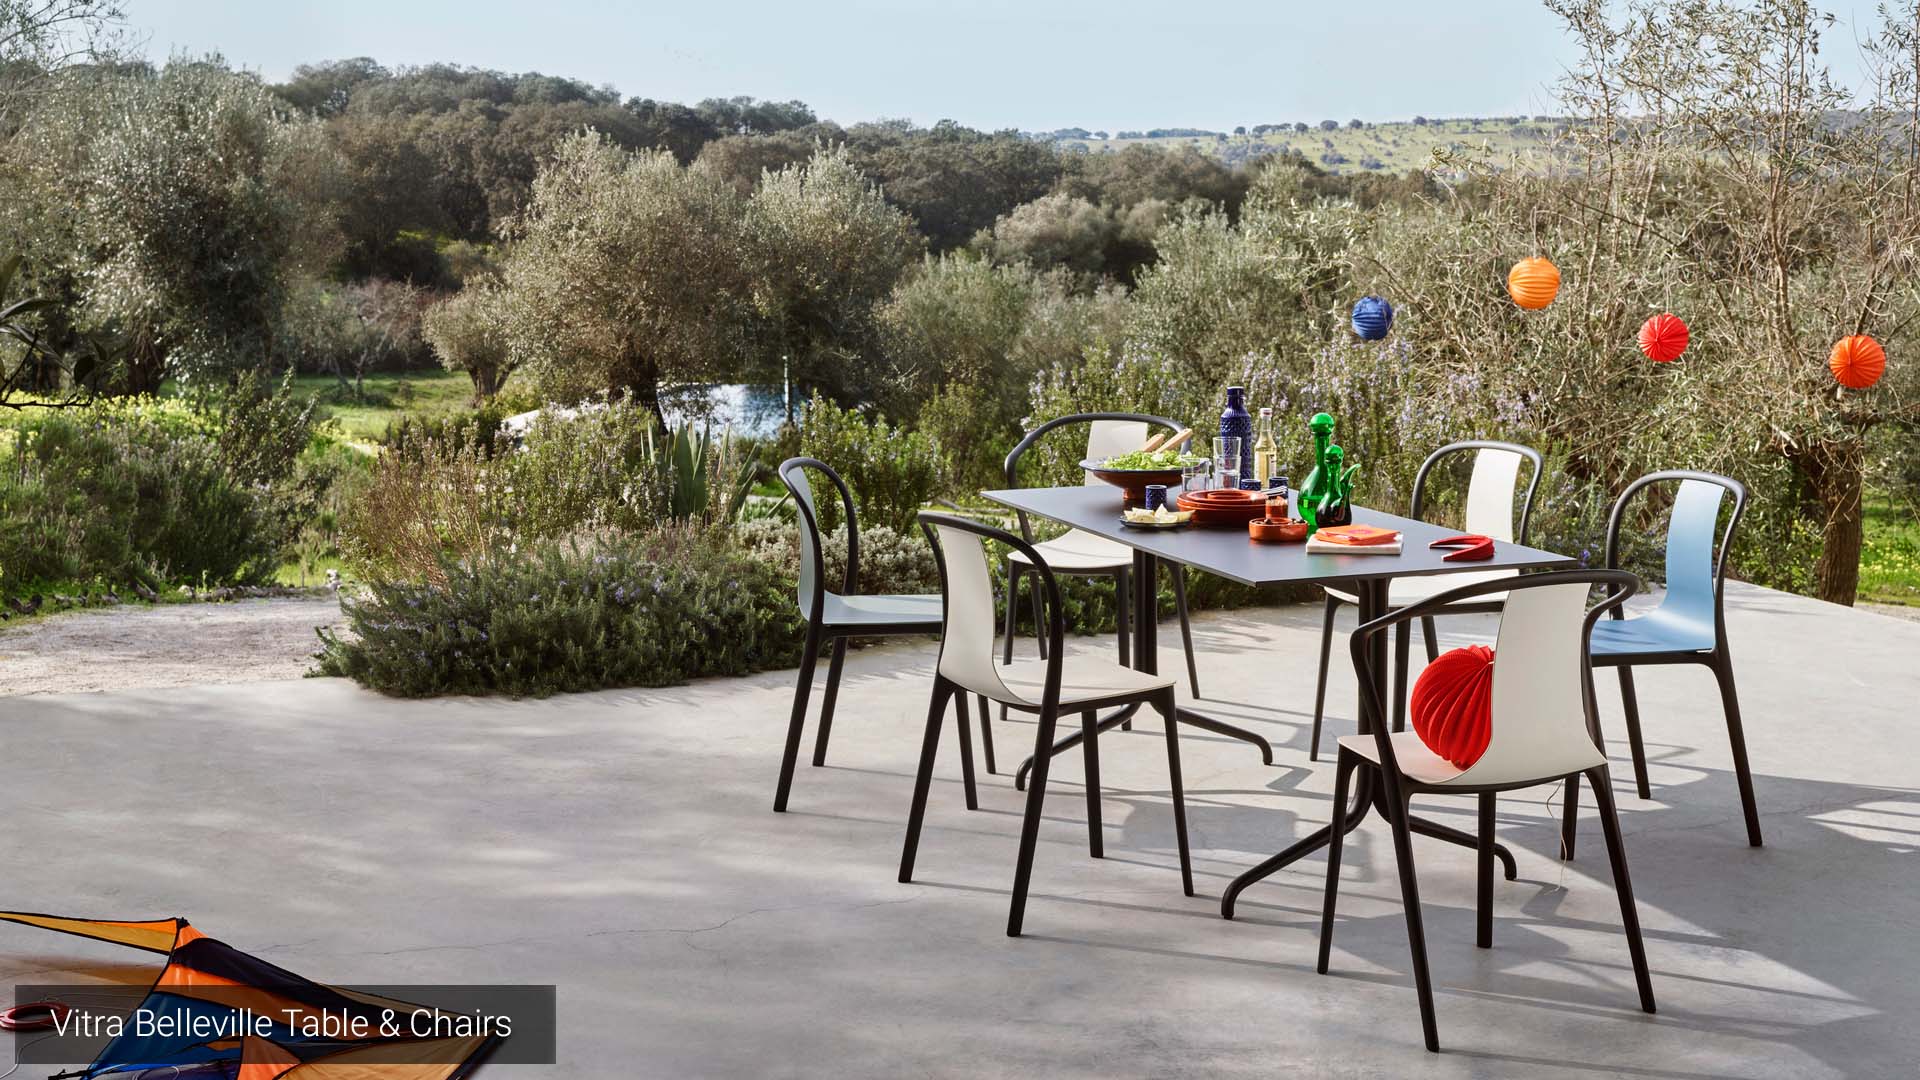 Vitra Belleville Table & Chairs